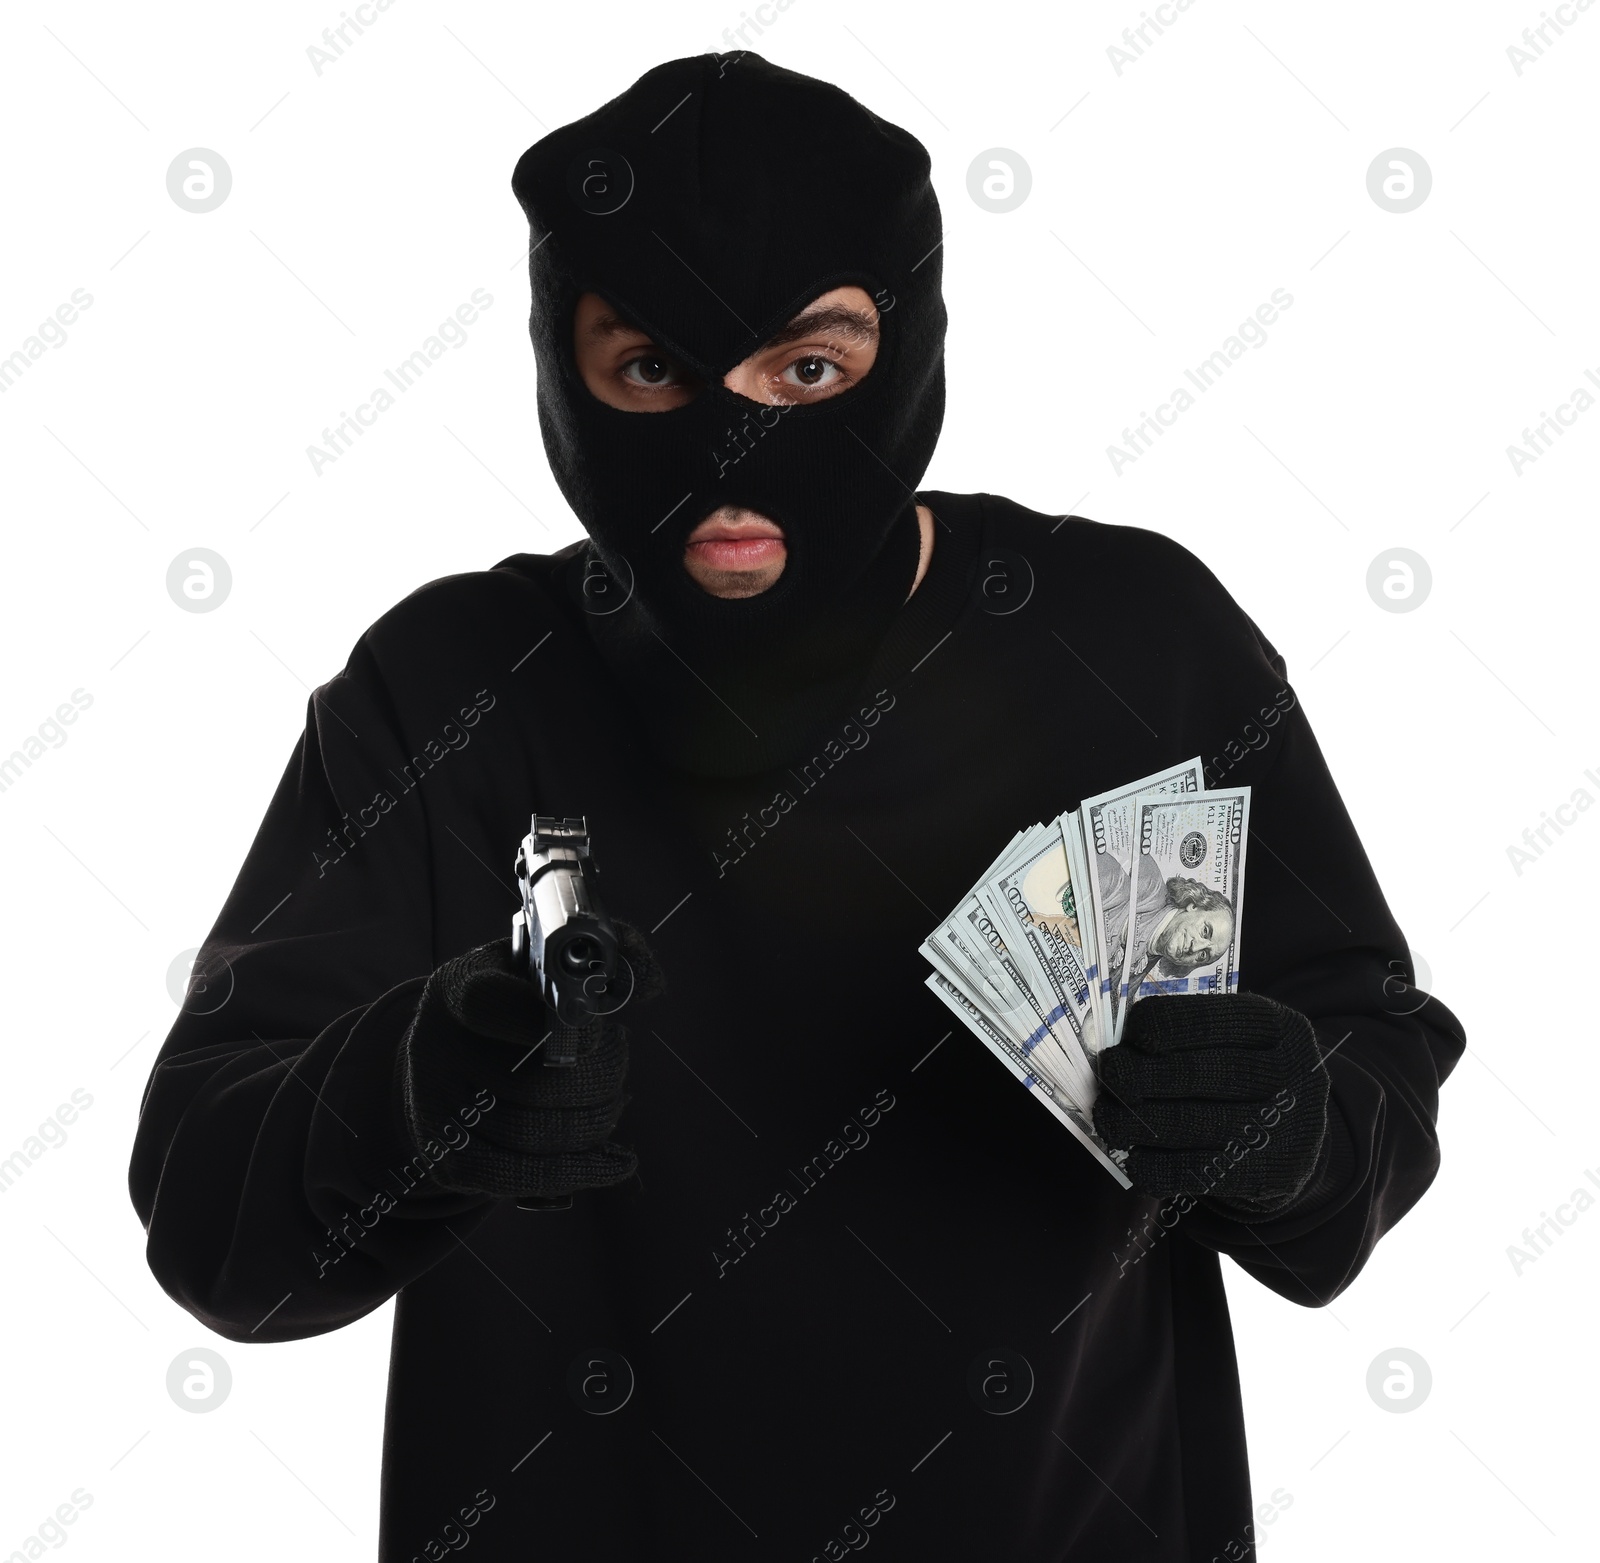 Photo of Thief in balaclava with gun and money on white background